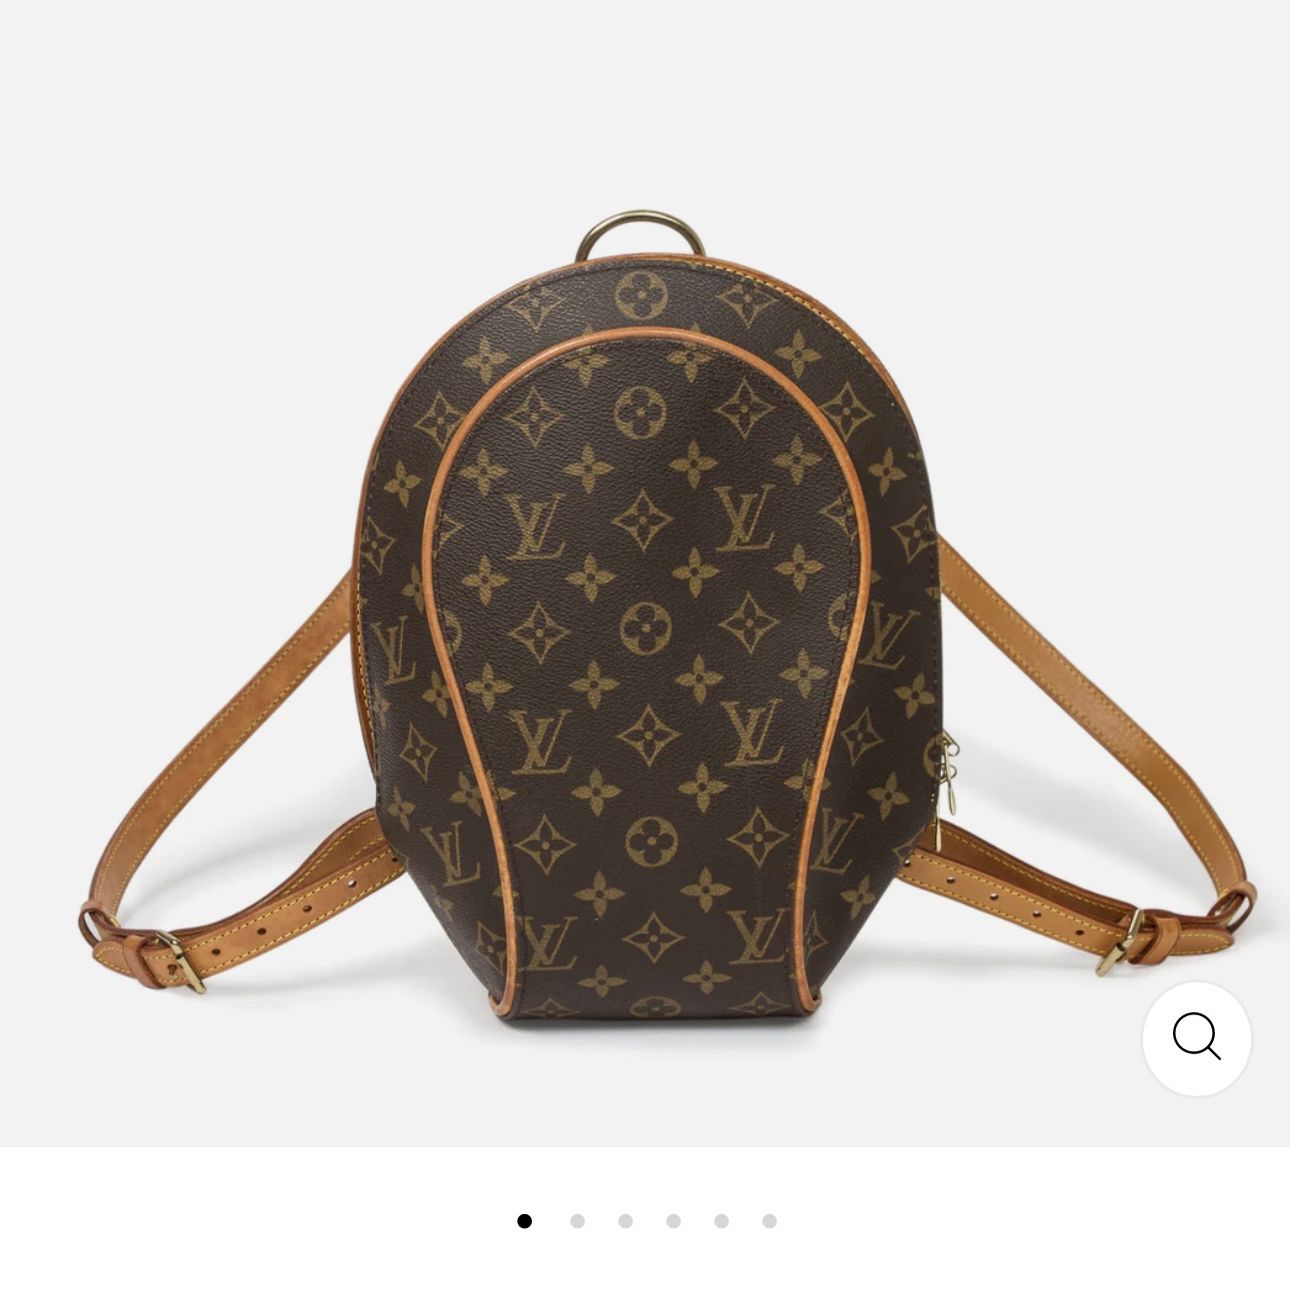 LOUIS VUITTON Monogram Mabillon for Sale in Lakewood, CA - OfferUp